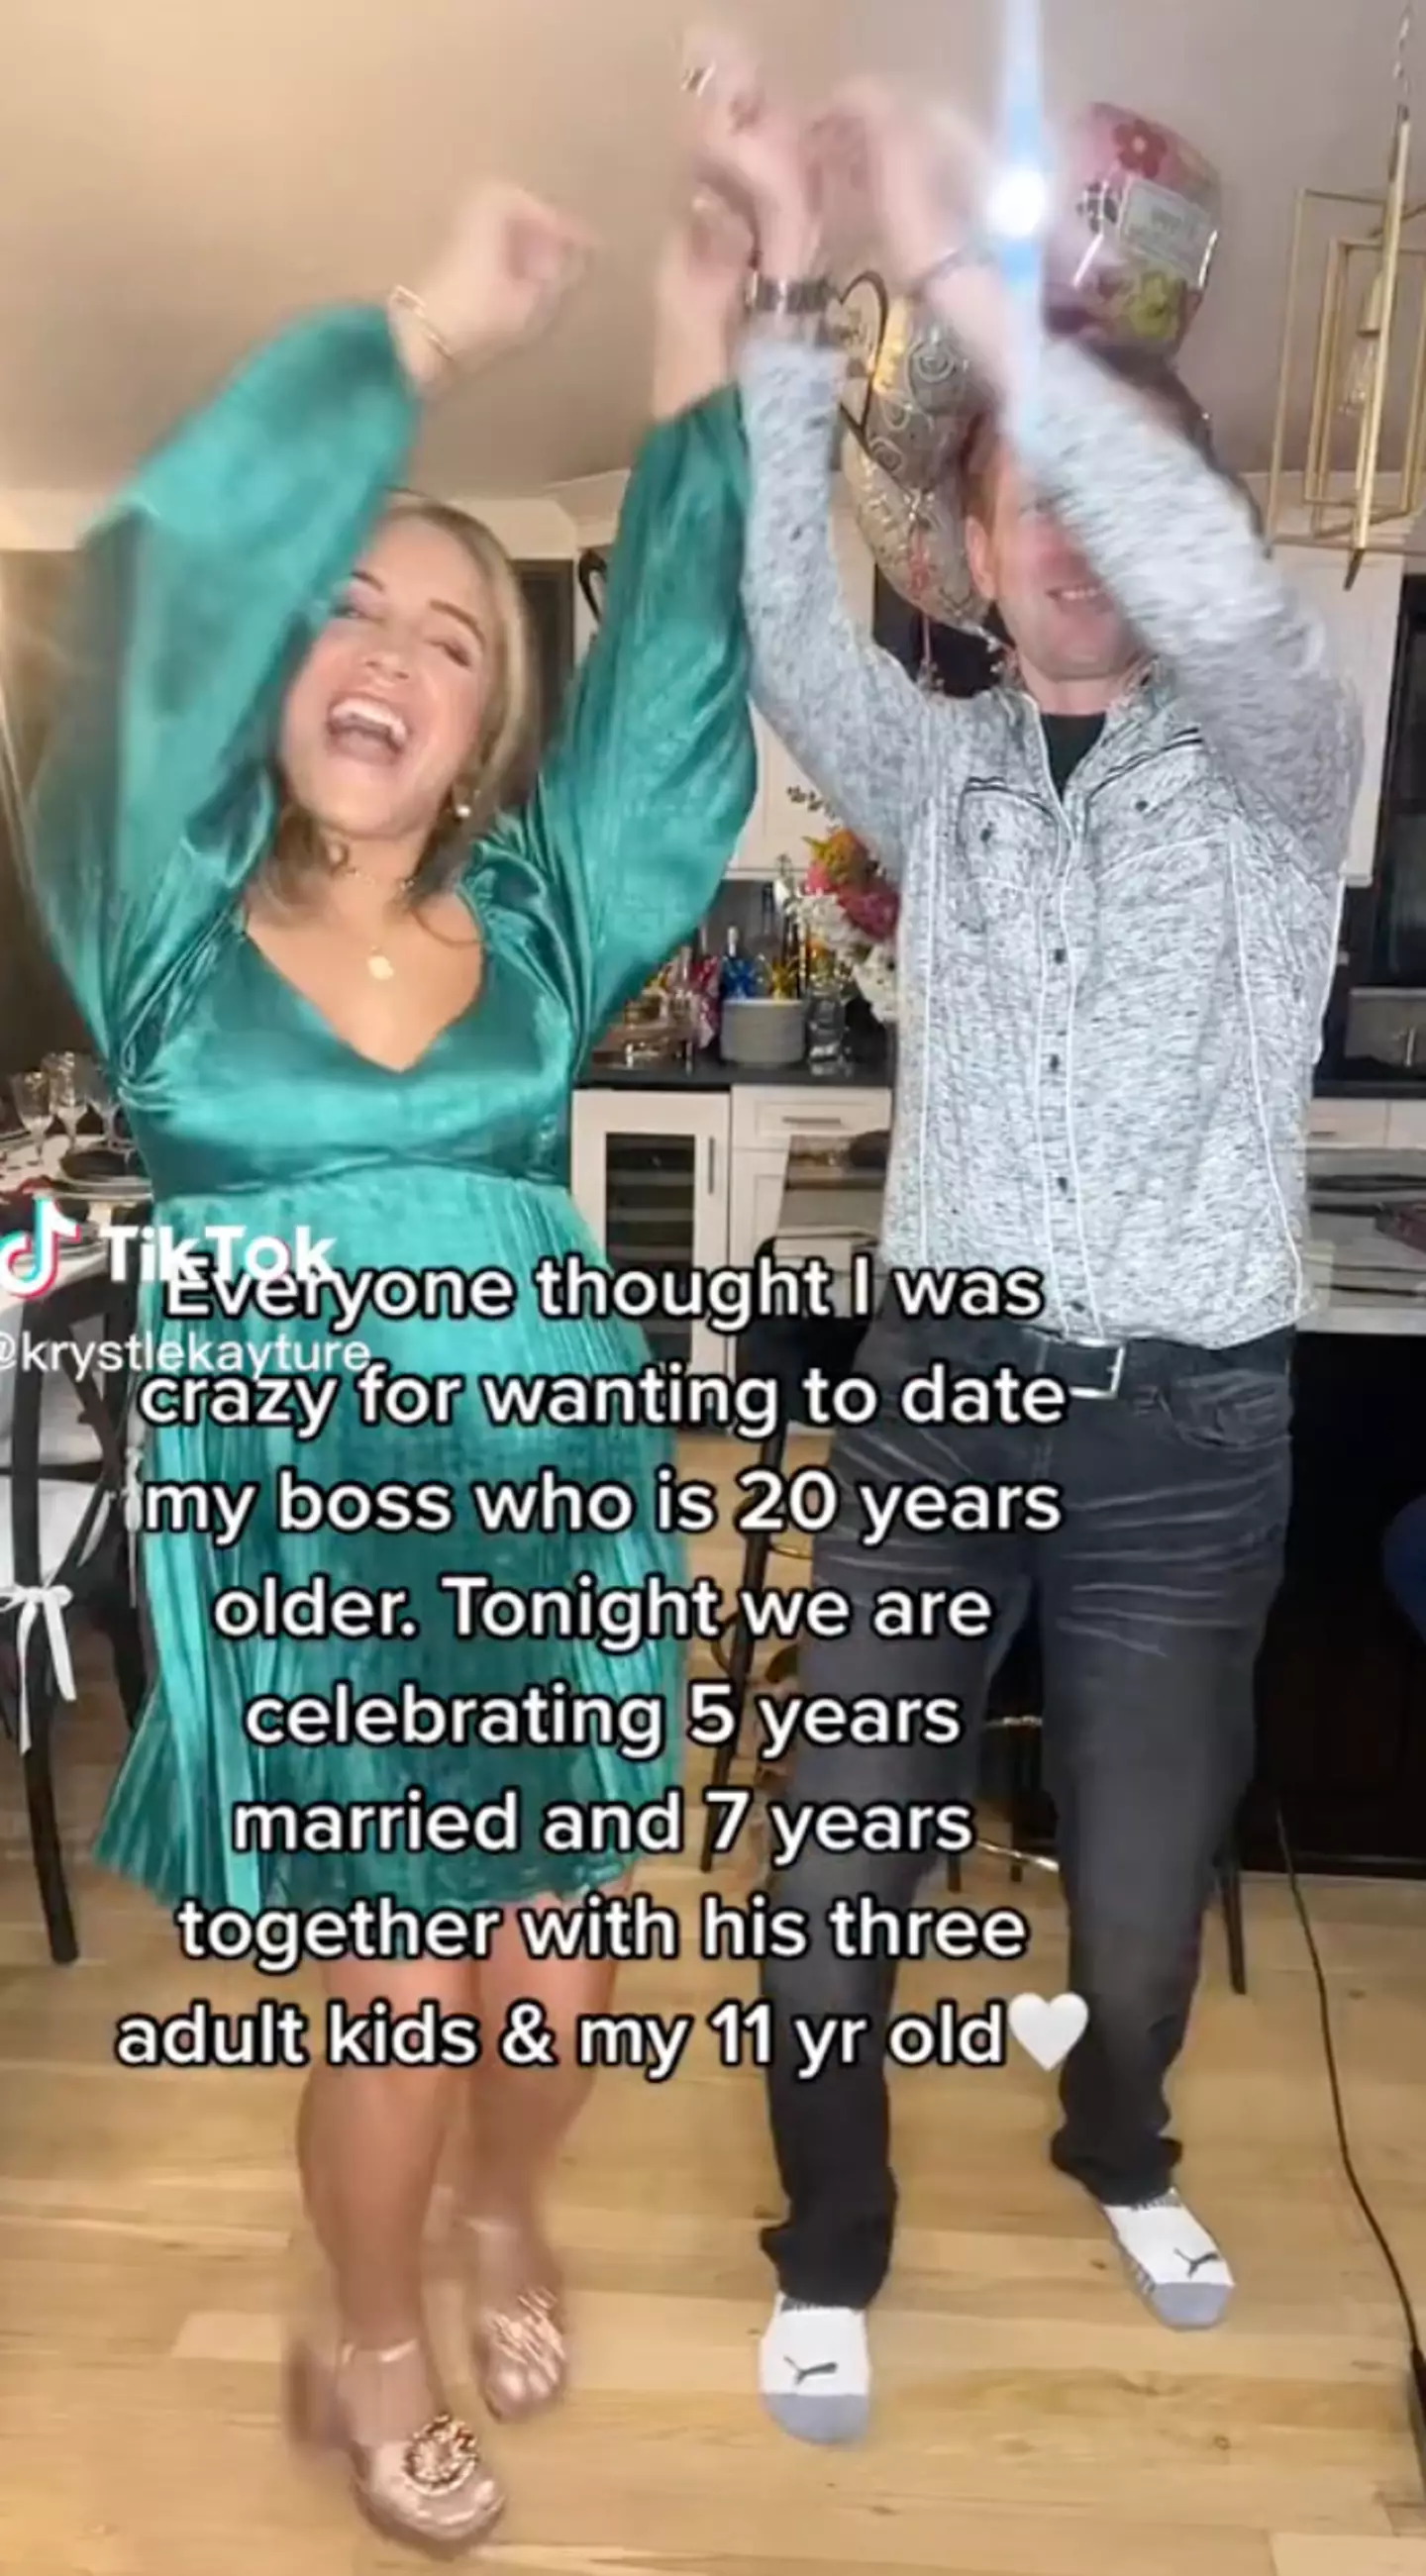 In the clip, the pair could be seen dancing around the house while celebrating their anniversary.